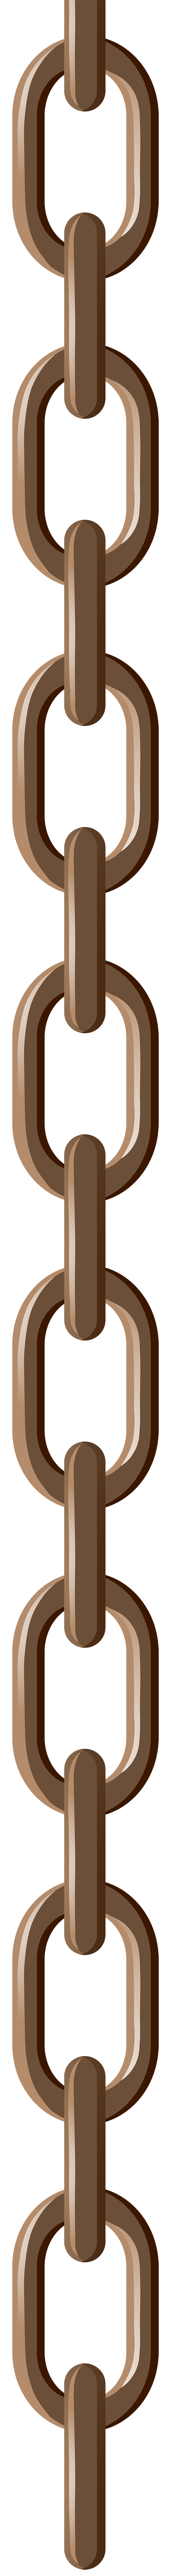 chain clipart png